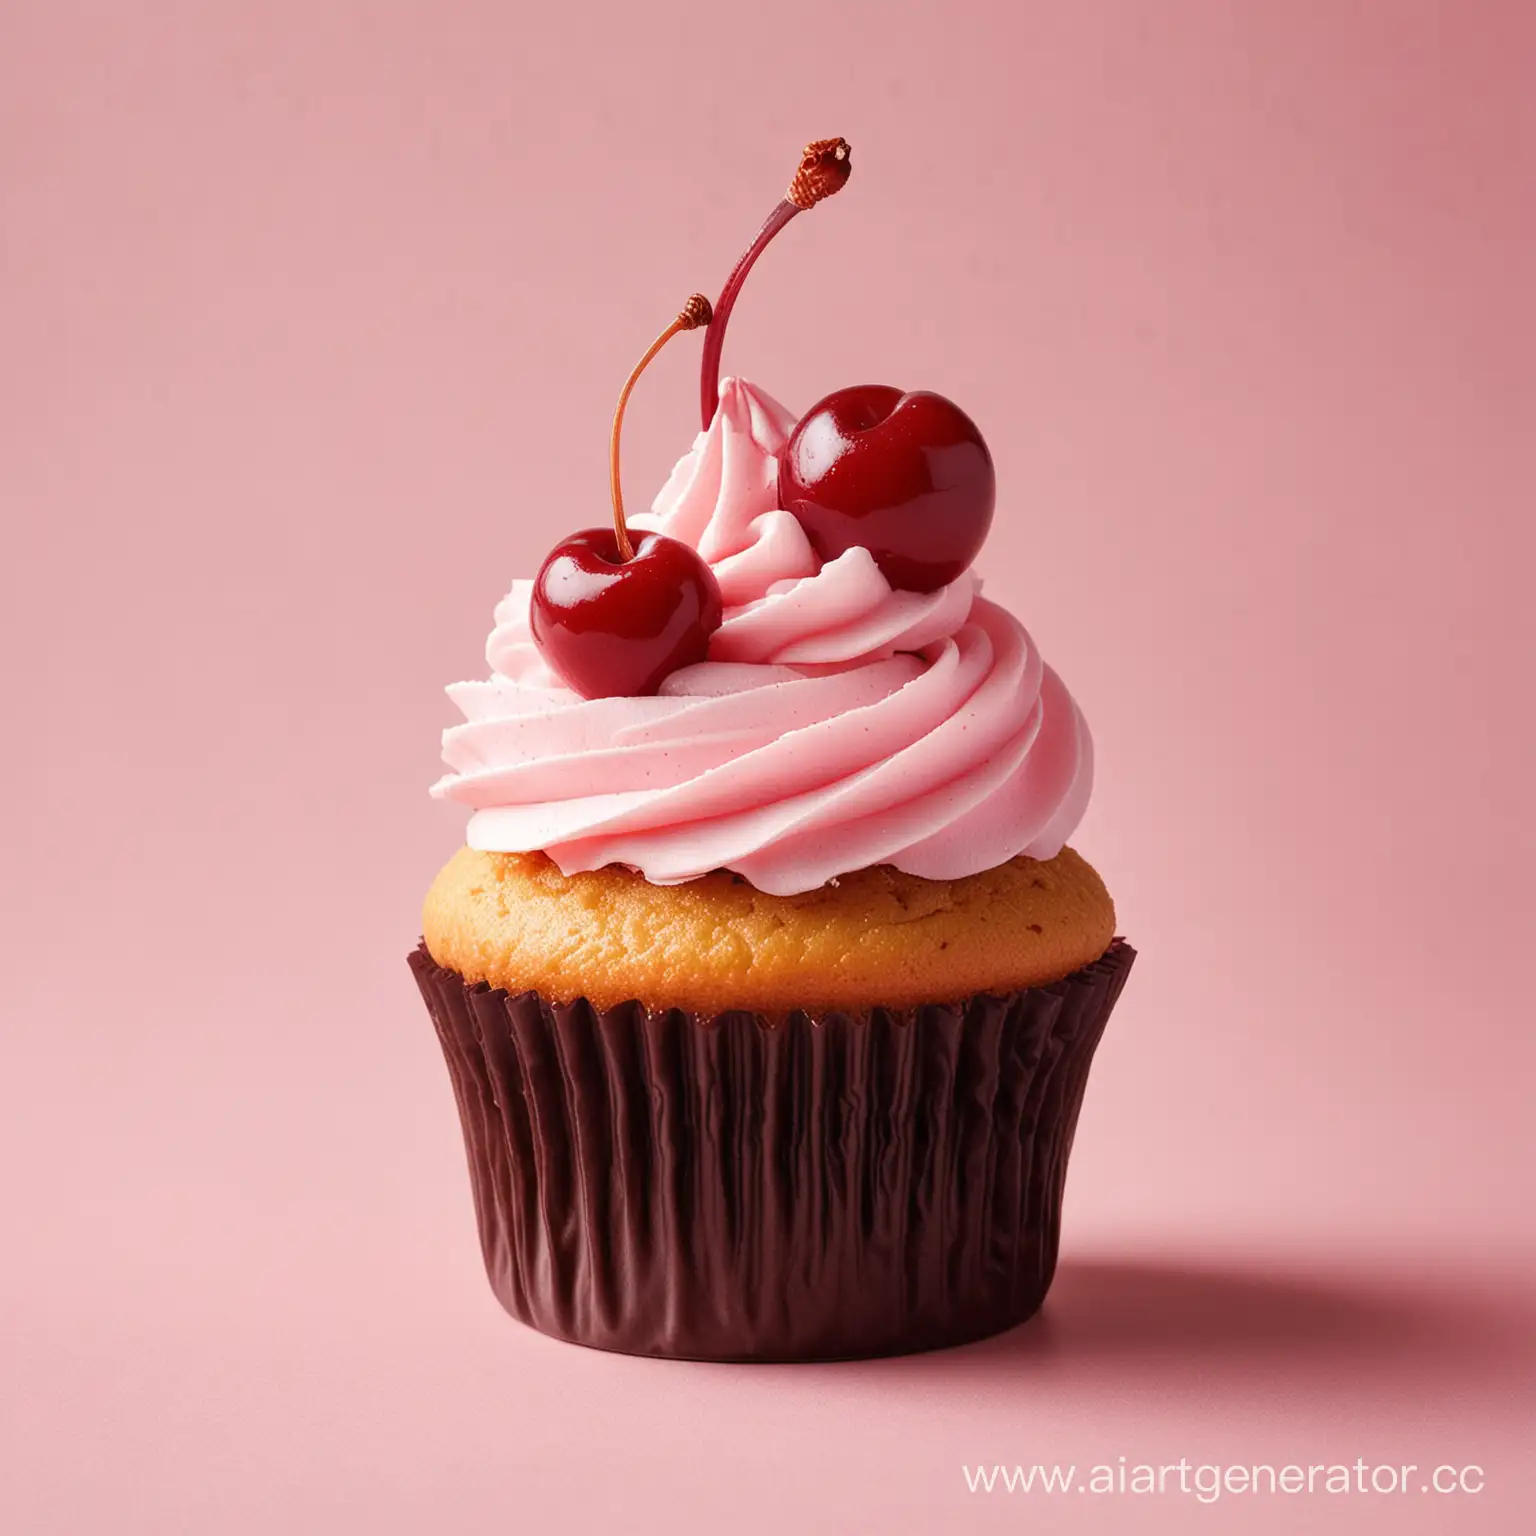 Delicious-Cupcake-with-Fresh-Cherry-on-Top